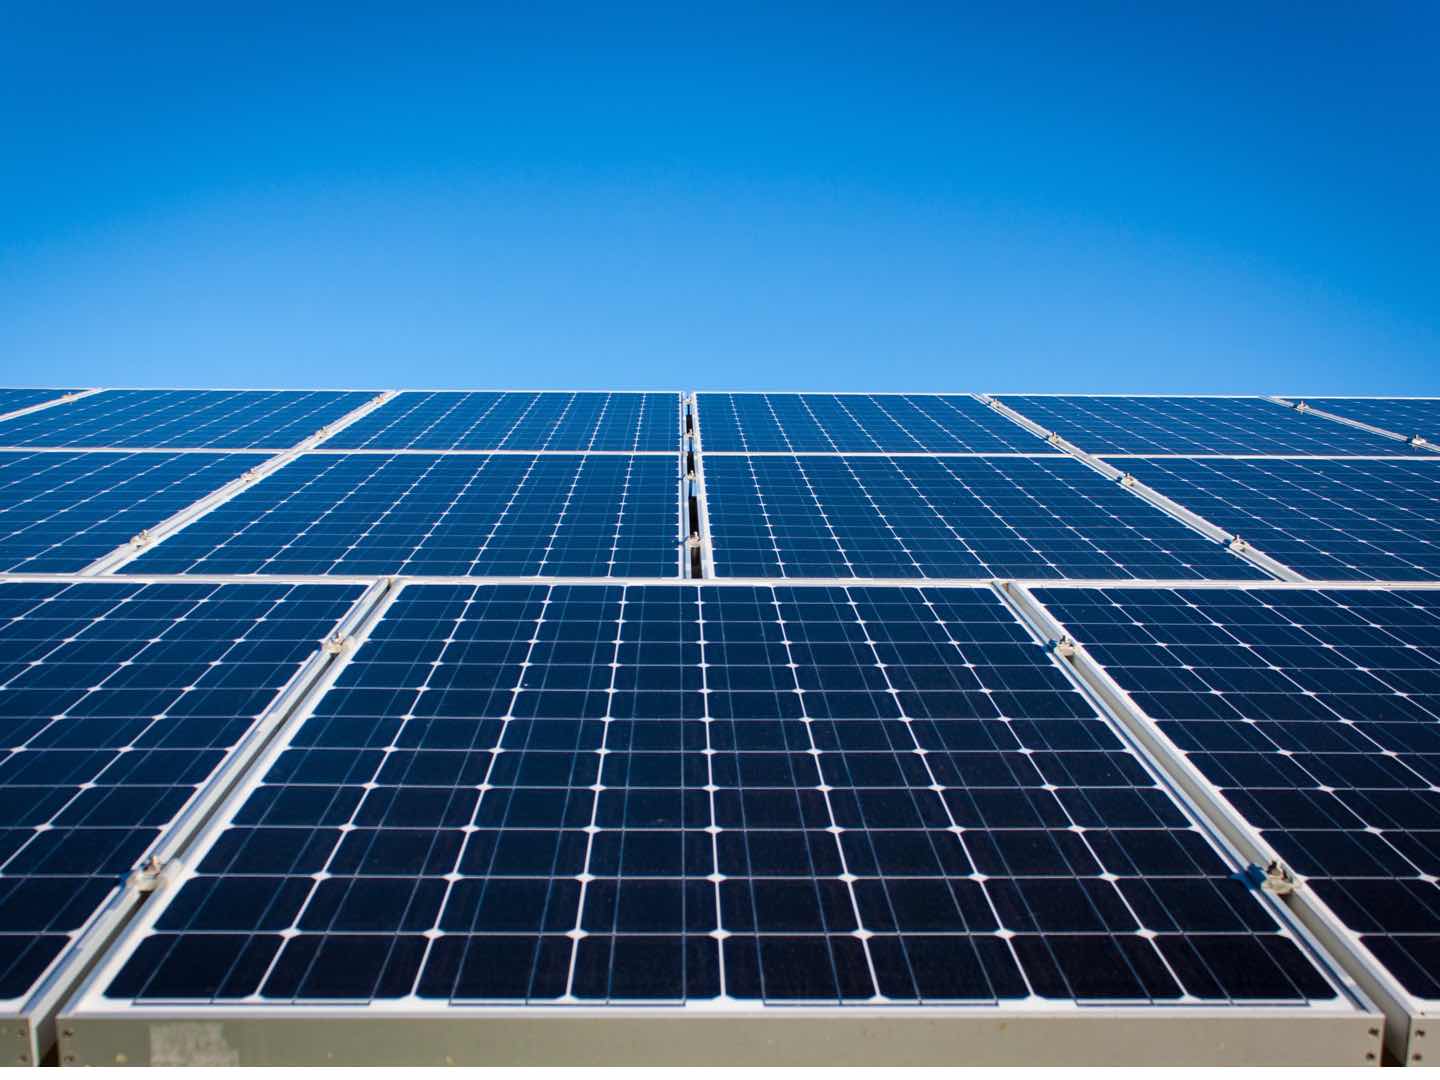 Solar Panel Cleaning improves the efficiency of your solar panels and saves you money.